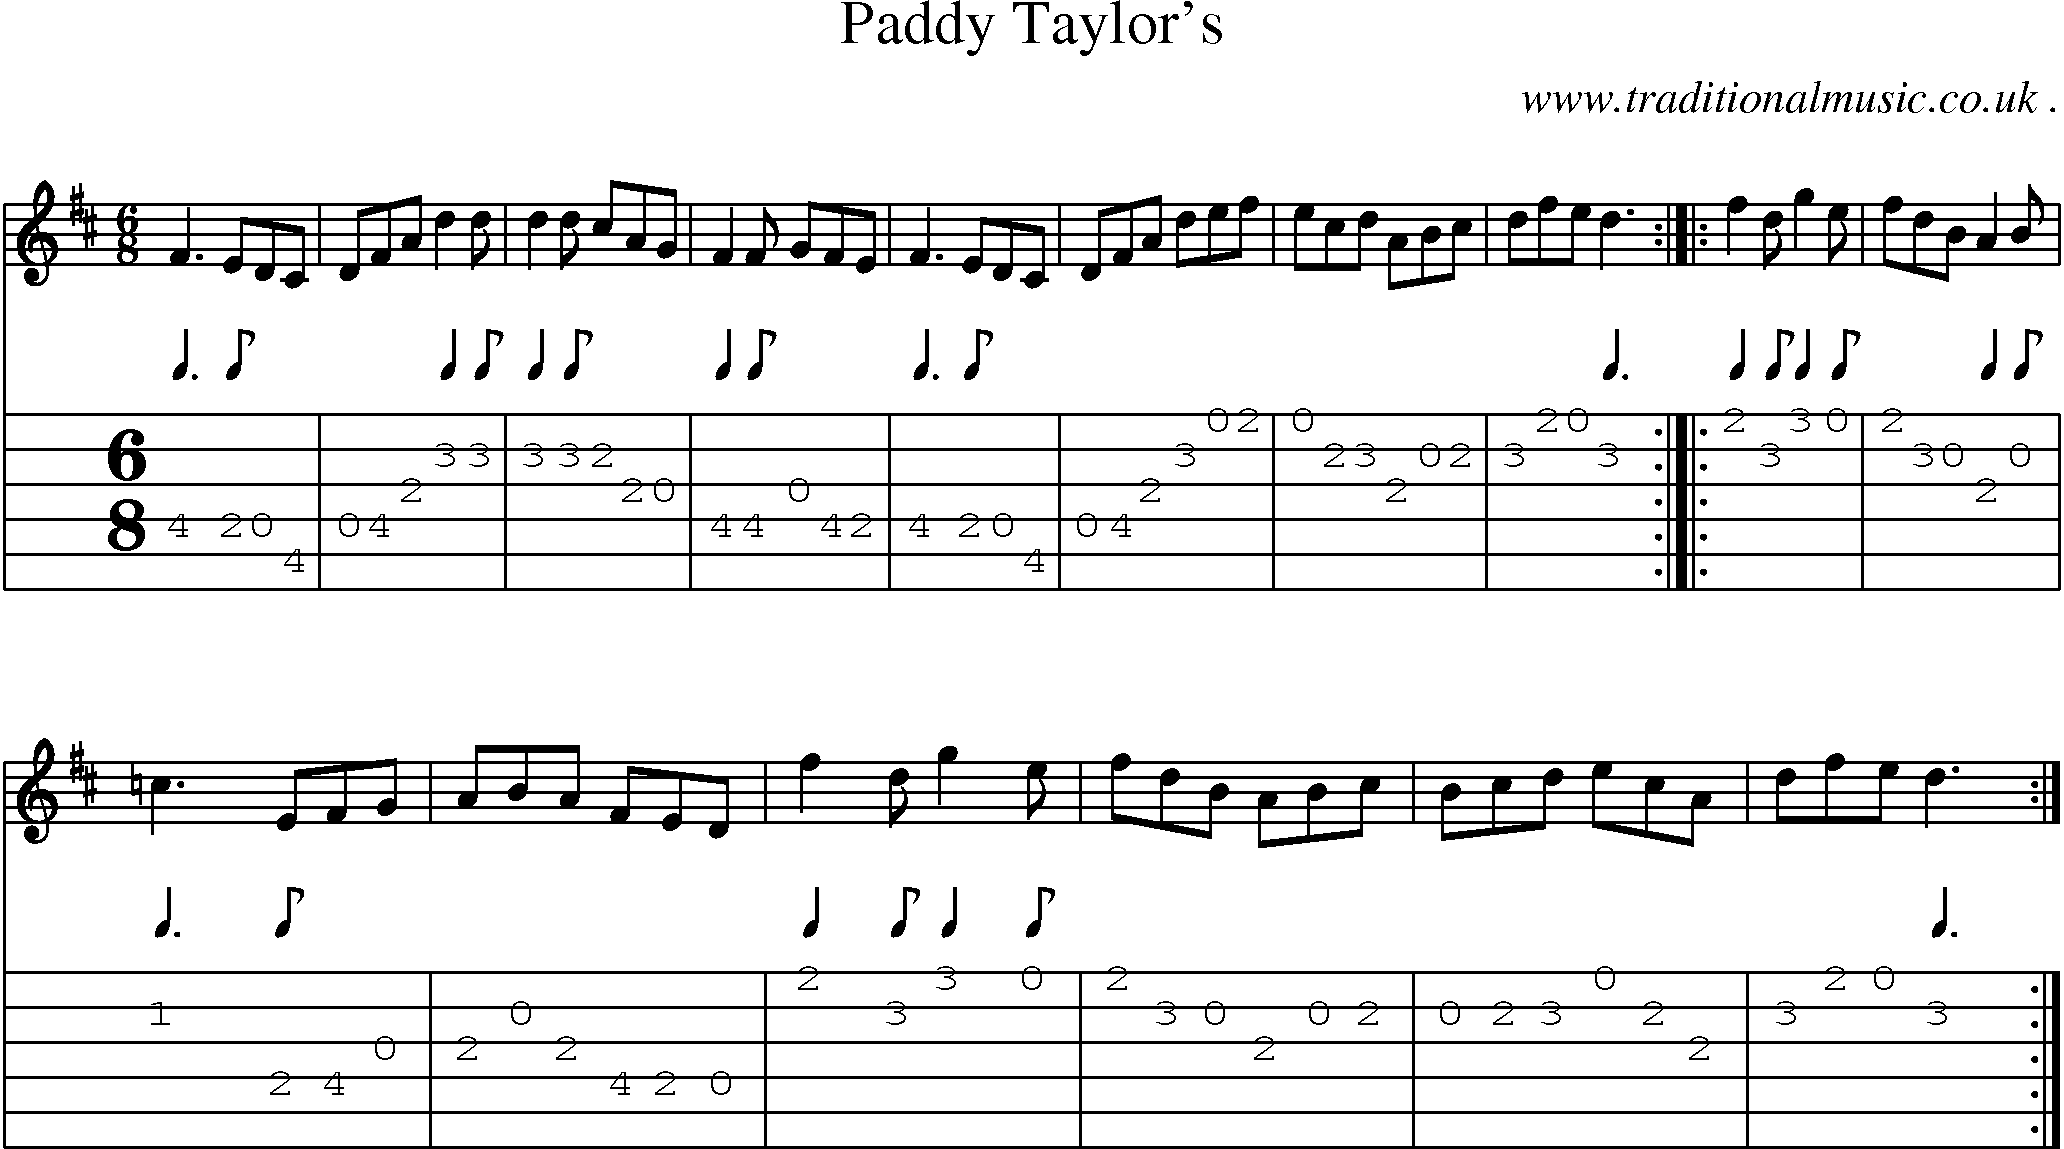 Sheet-Music and Guitar Tabs for Paddy Taylor